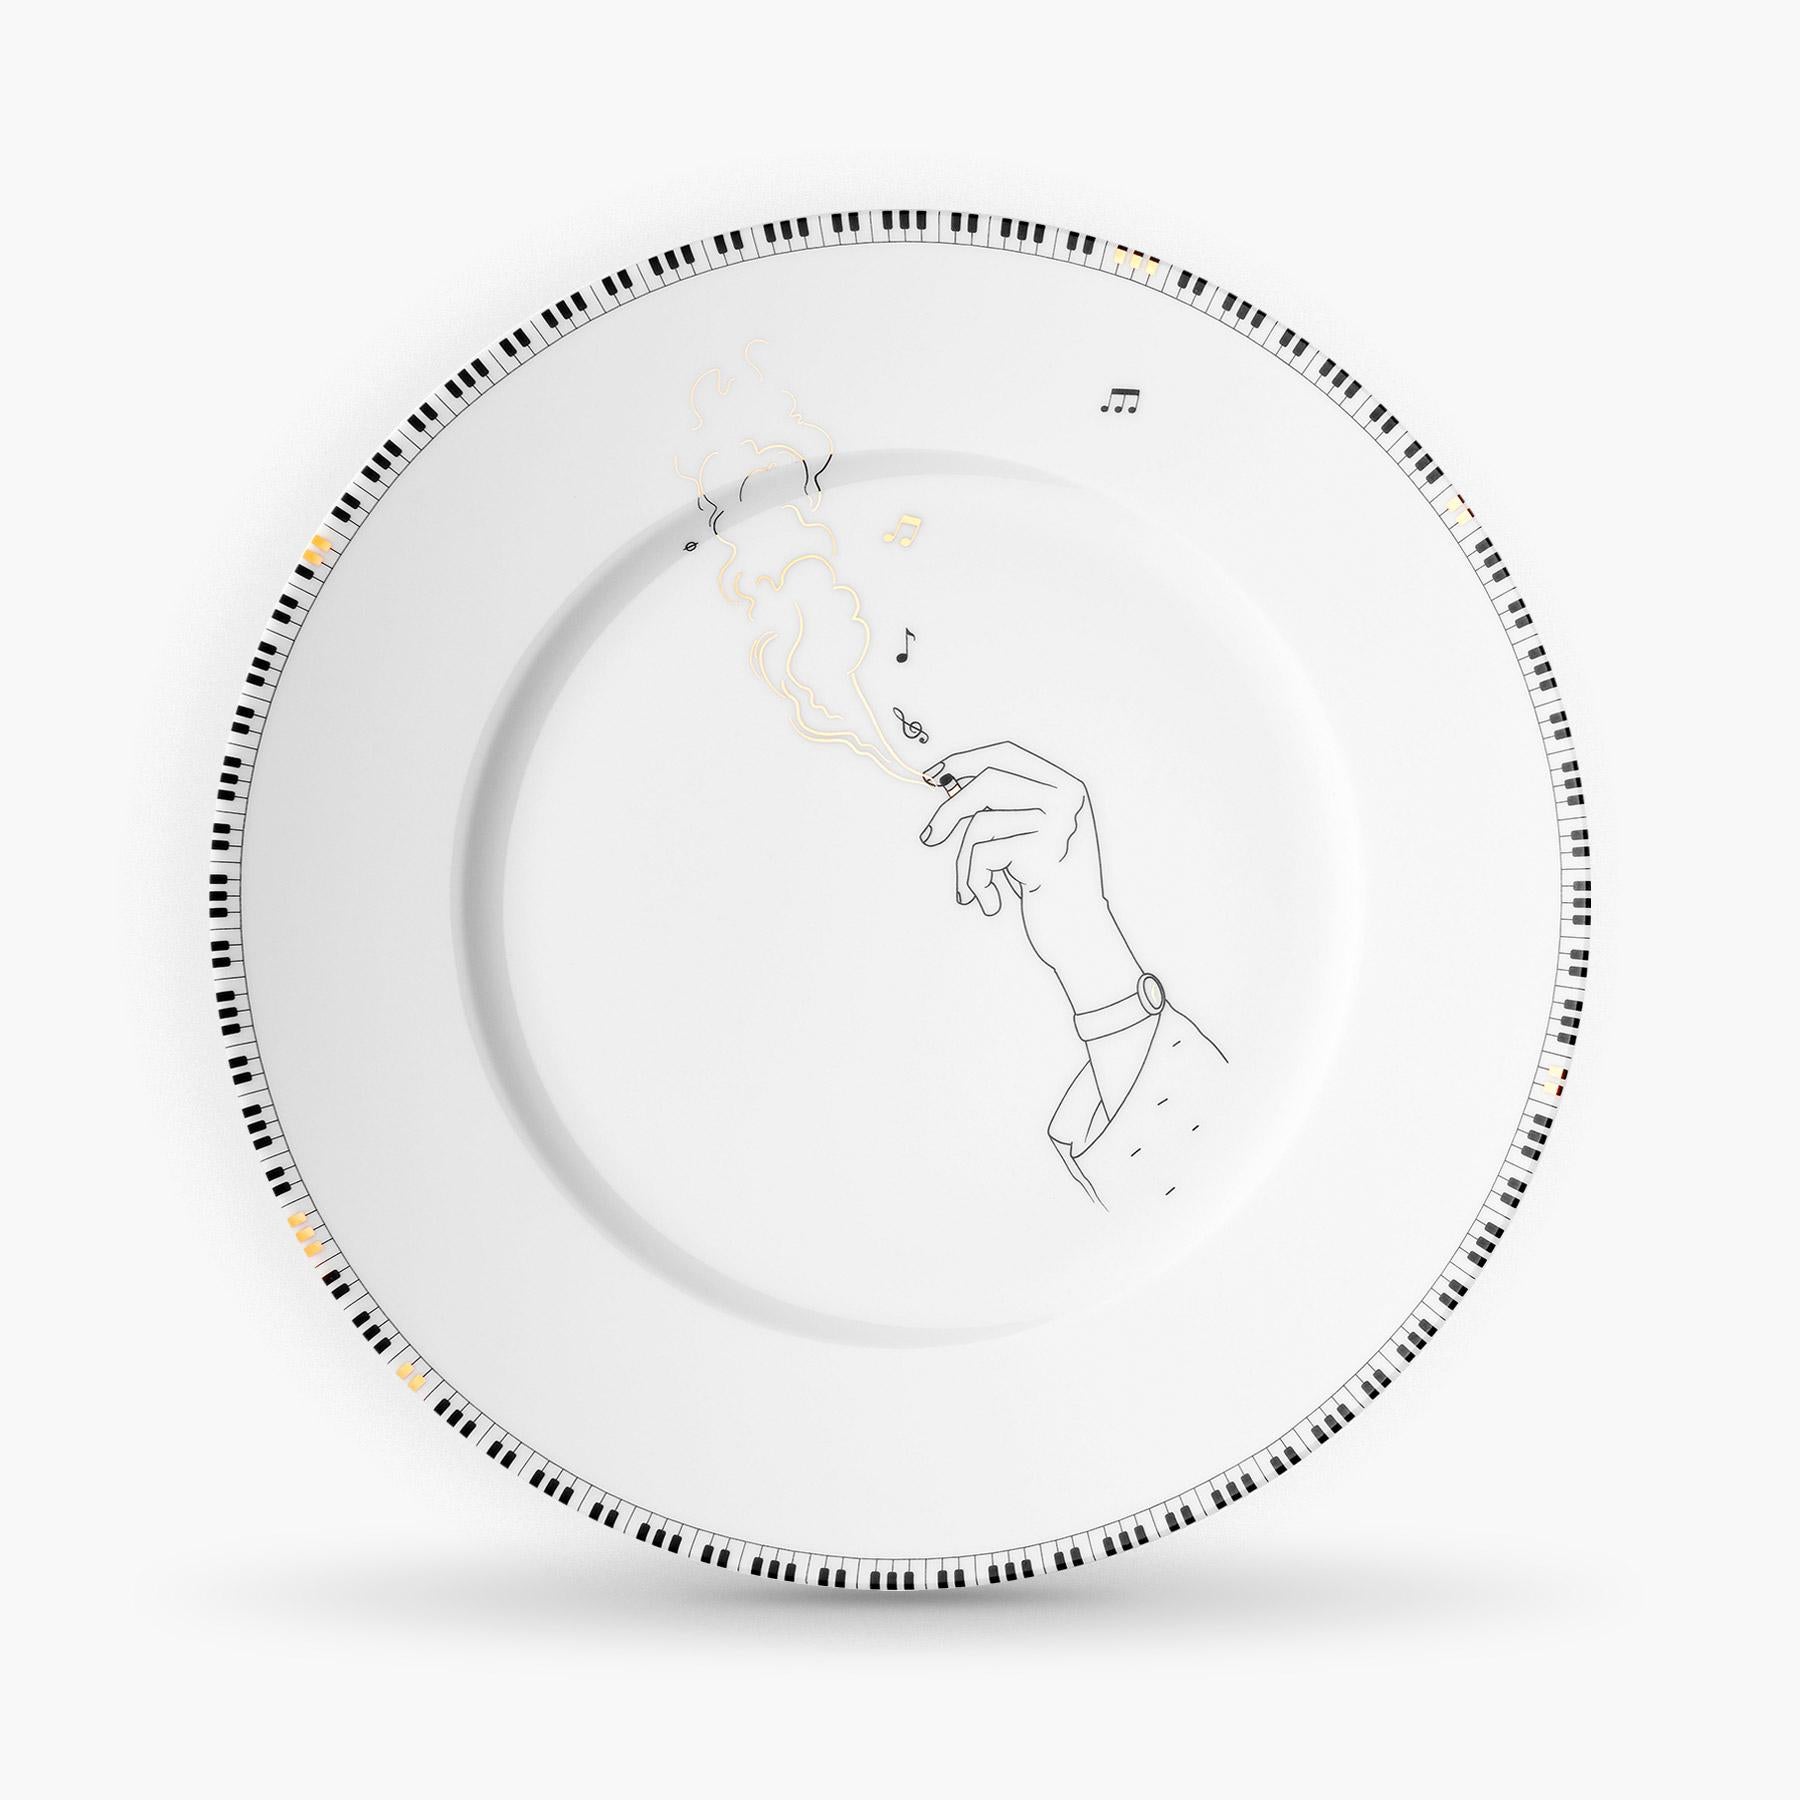 Maison Fragile and the Parisian illustrator artist Jean-Michel Tixier have joined together to create a collection that pays tribute to these men and women, key figures of history, who have made Paris as we know it.

Set featuring the 4 dinner plates